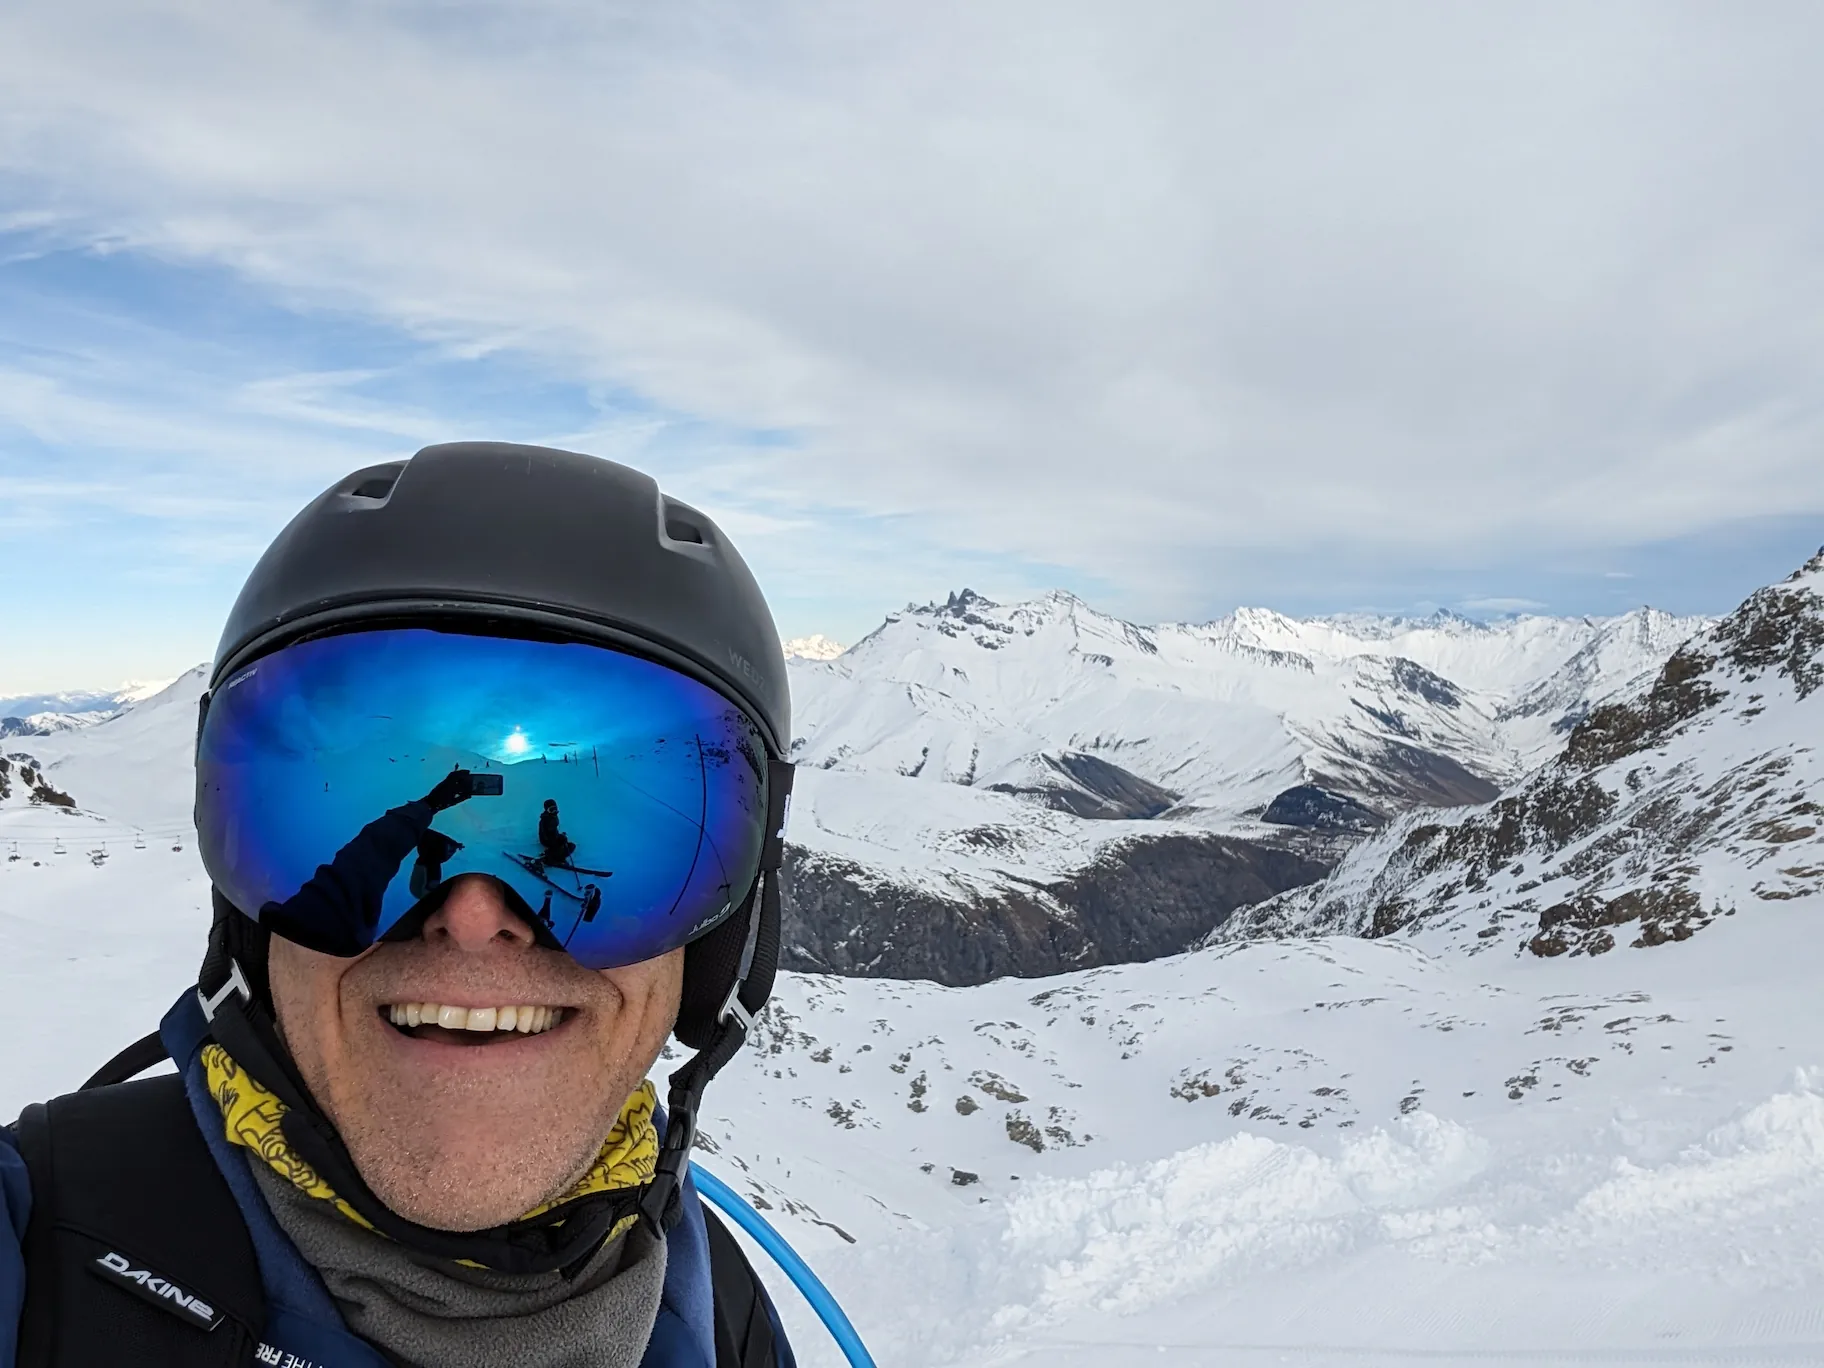 My happy face, with the snowy mountain range of the Maurienne in the background.